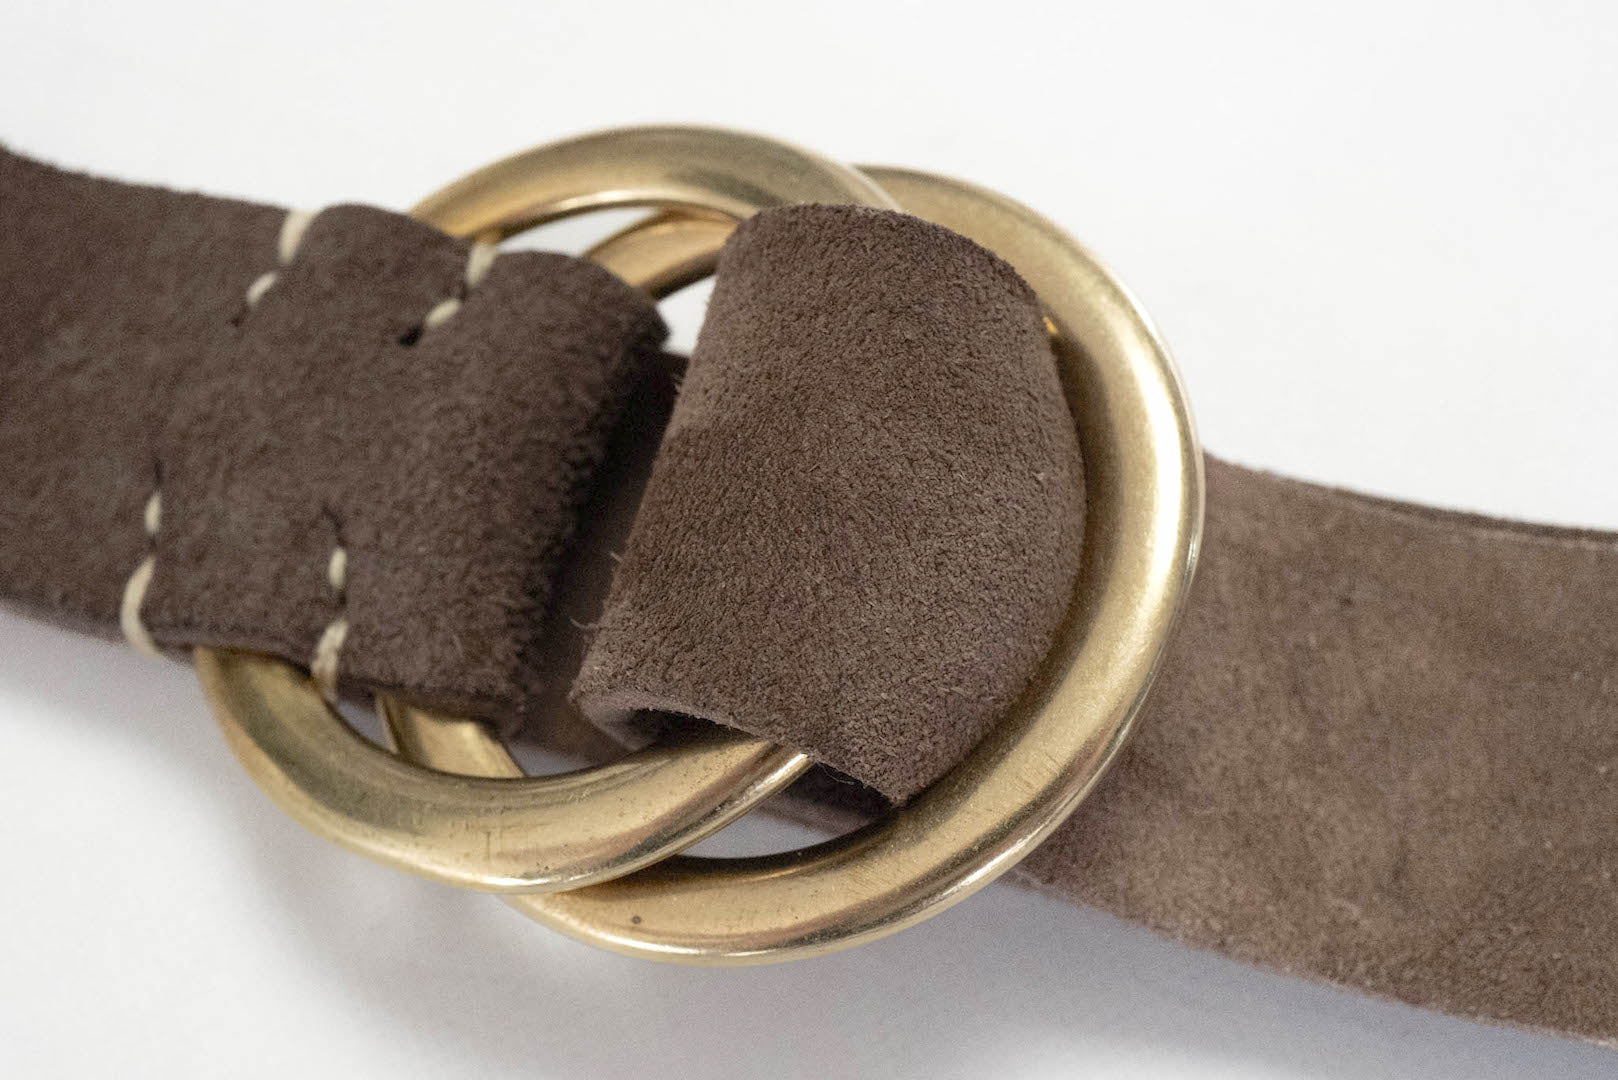 Warehouse Co "Double Rings" Suede Cowhide Belt (Chocolate Brown)